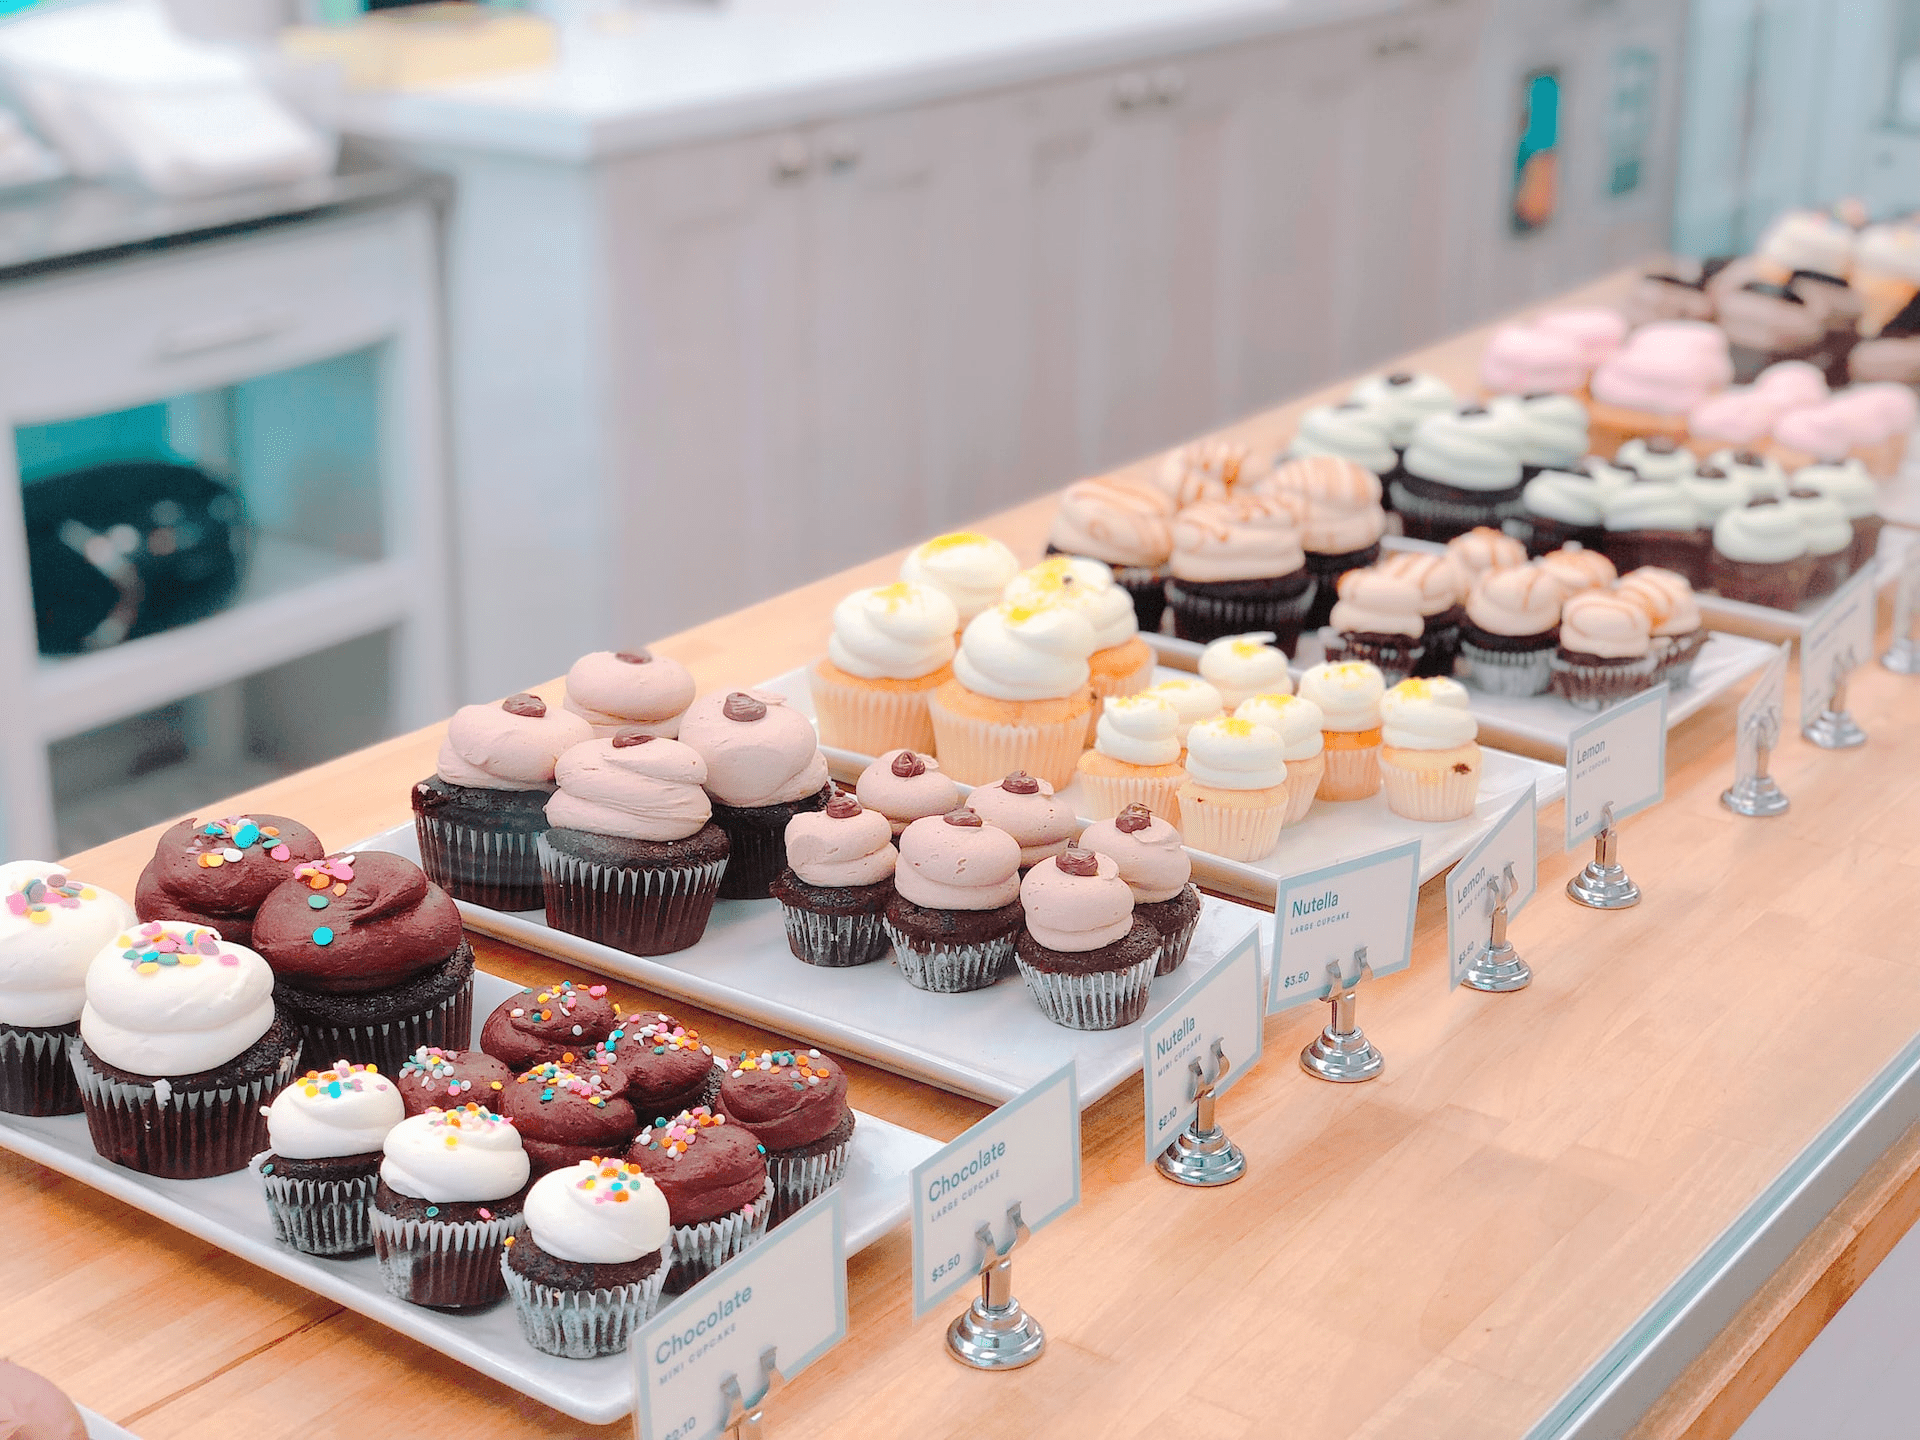 A table with many cupcakes on it - Cupcakes